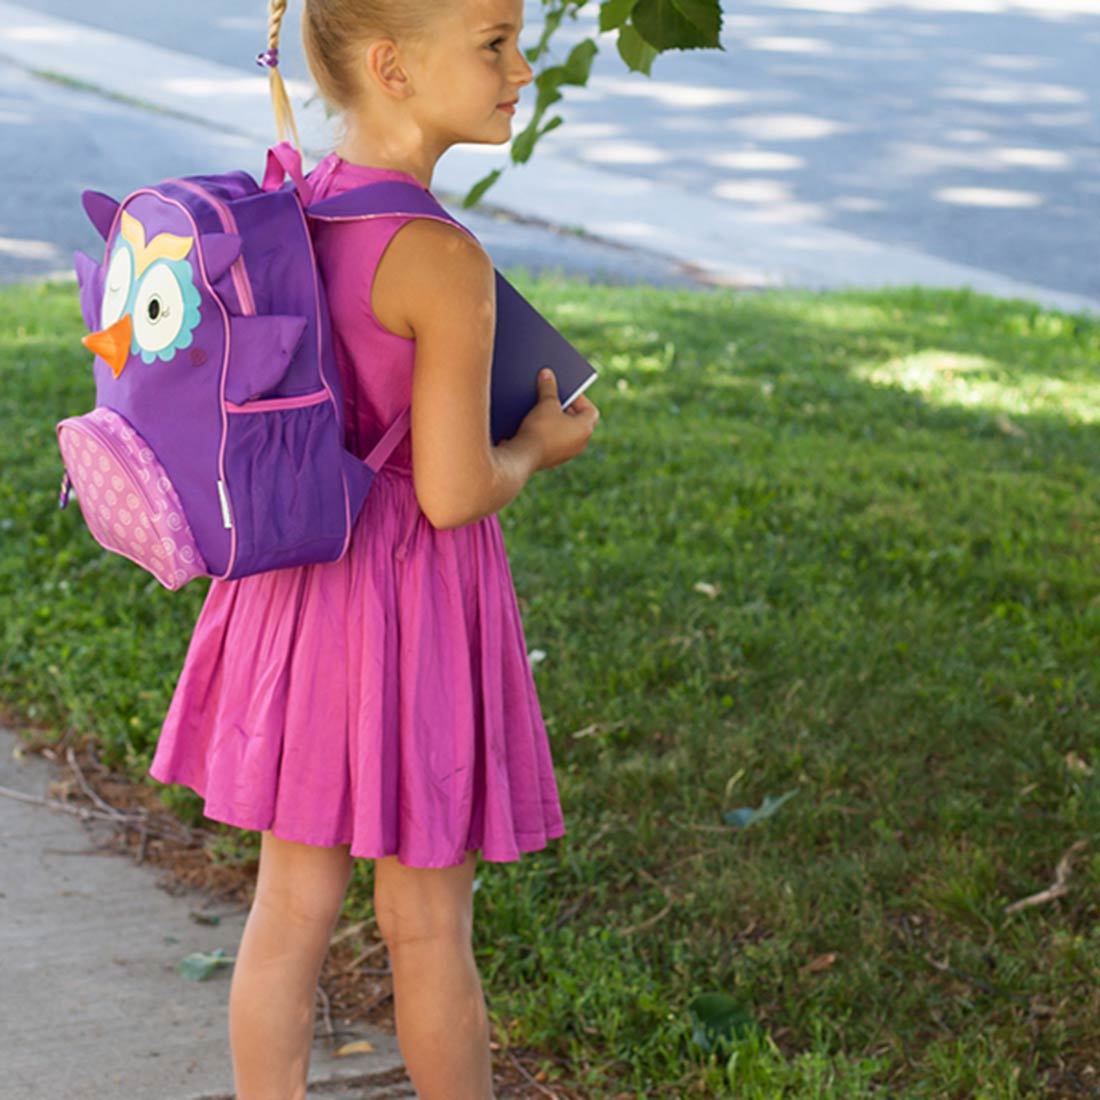 Kids Everyday Backpack - Olive the Owl - ZOOCCHINI